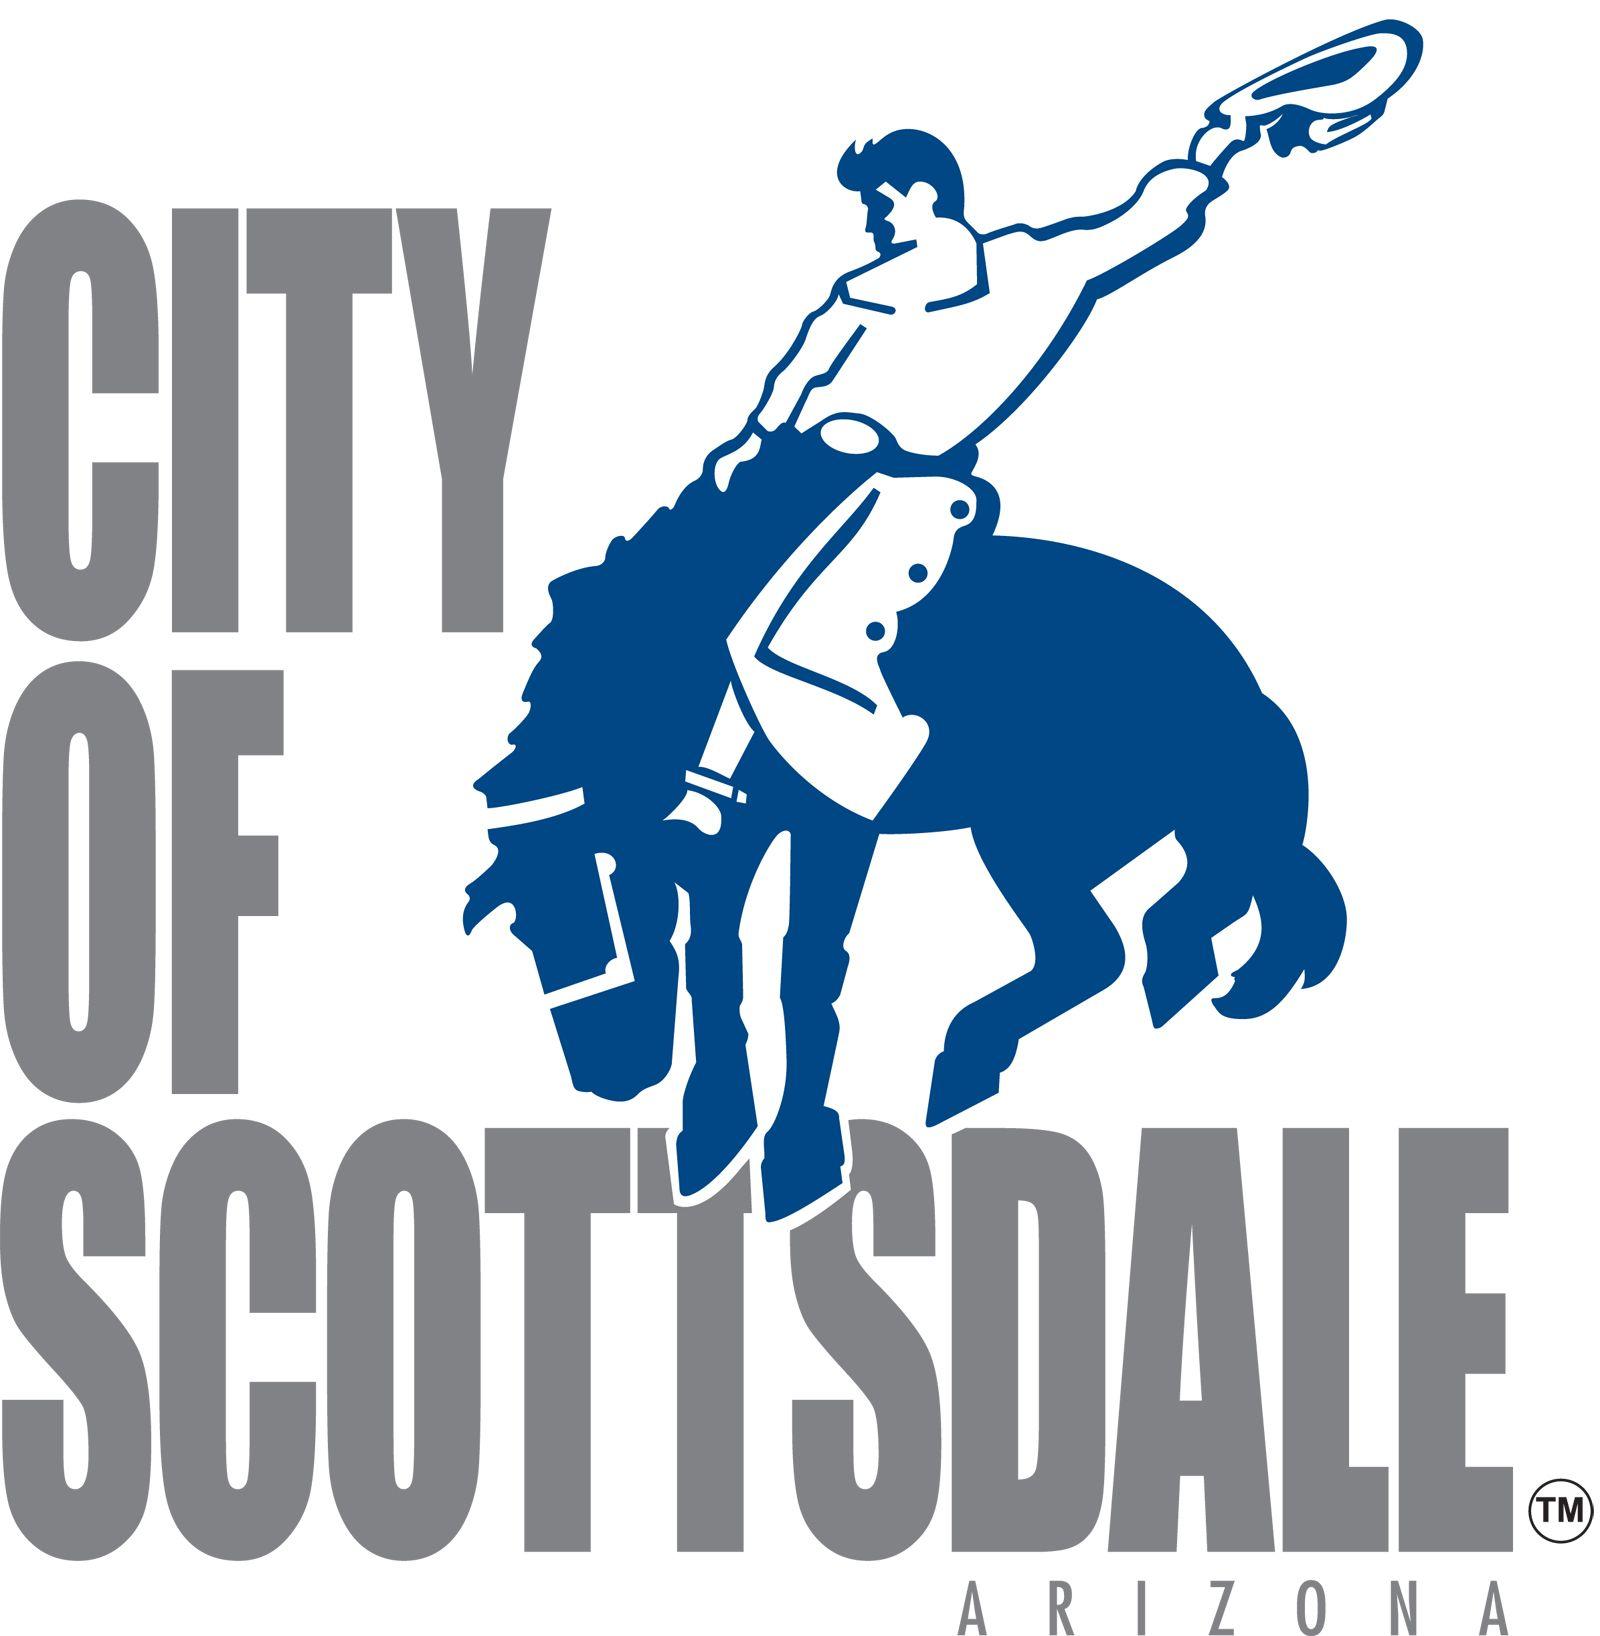 Scottsdale Logo - City of Scottsdale Logo with Horse and Rider Ranch